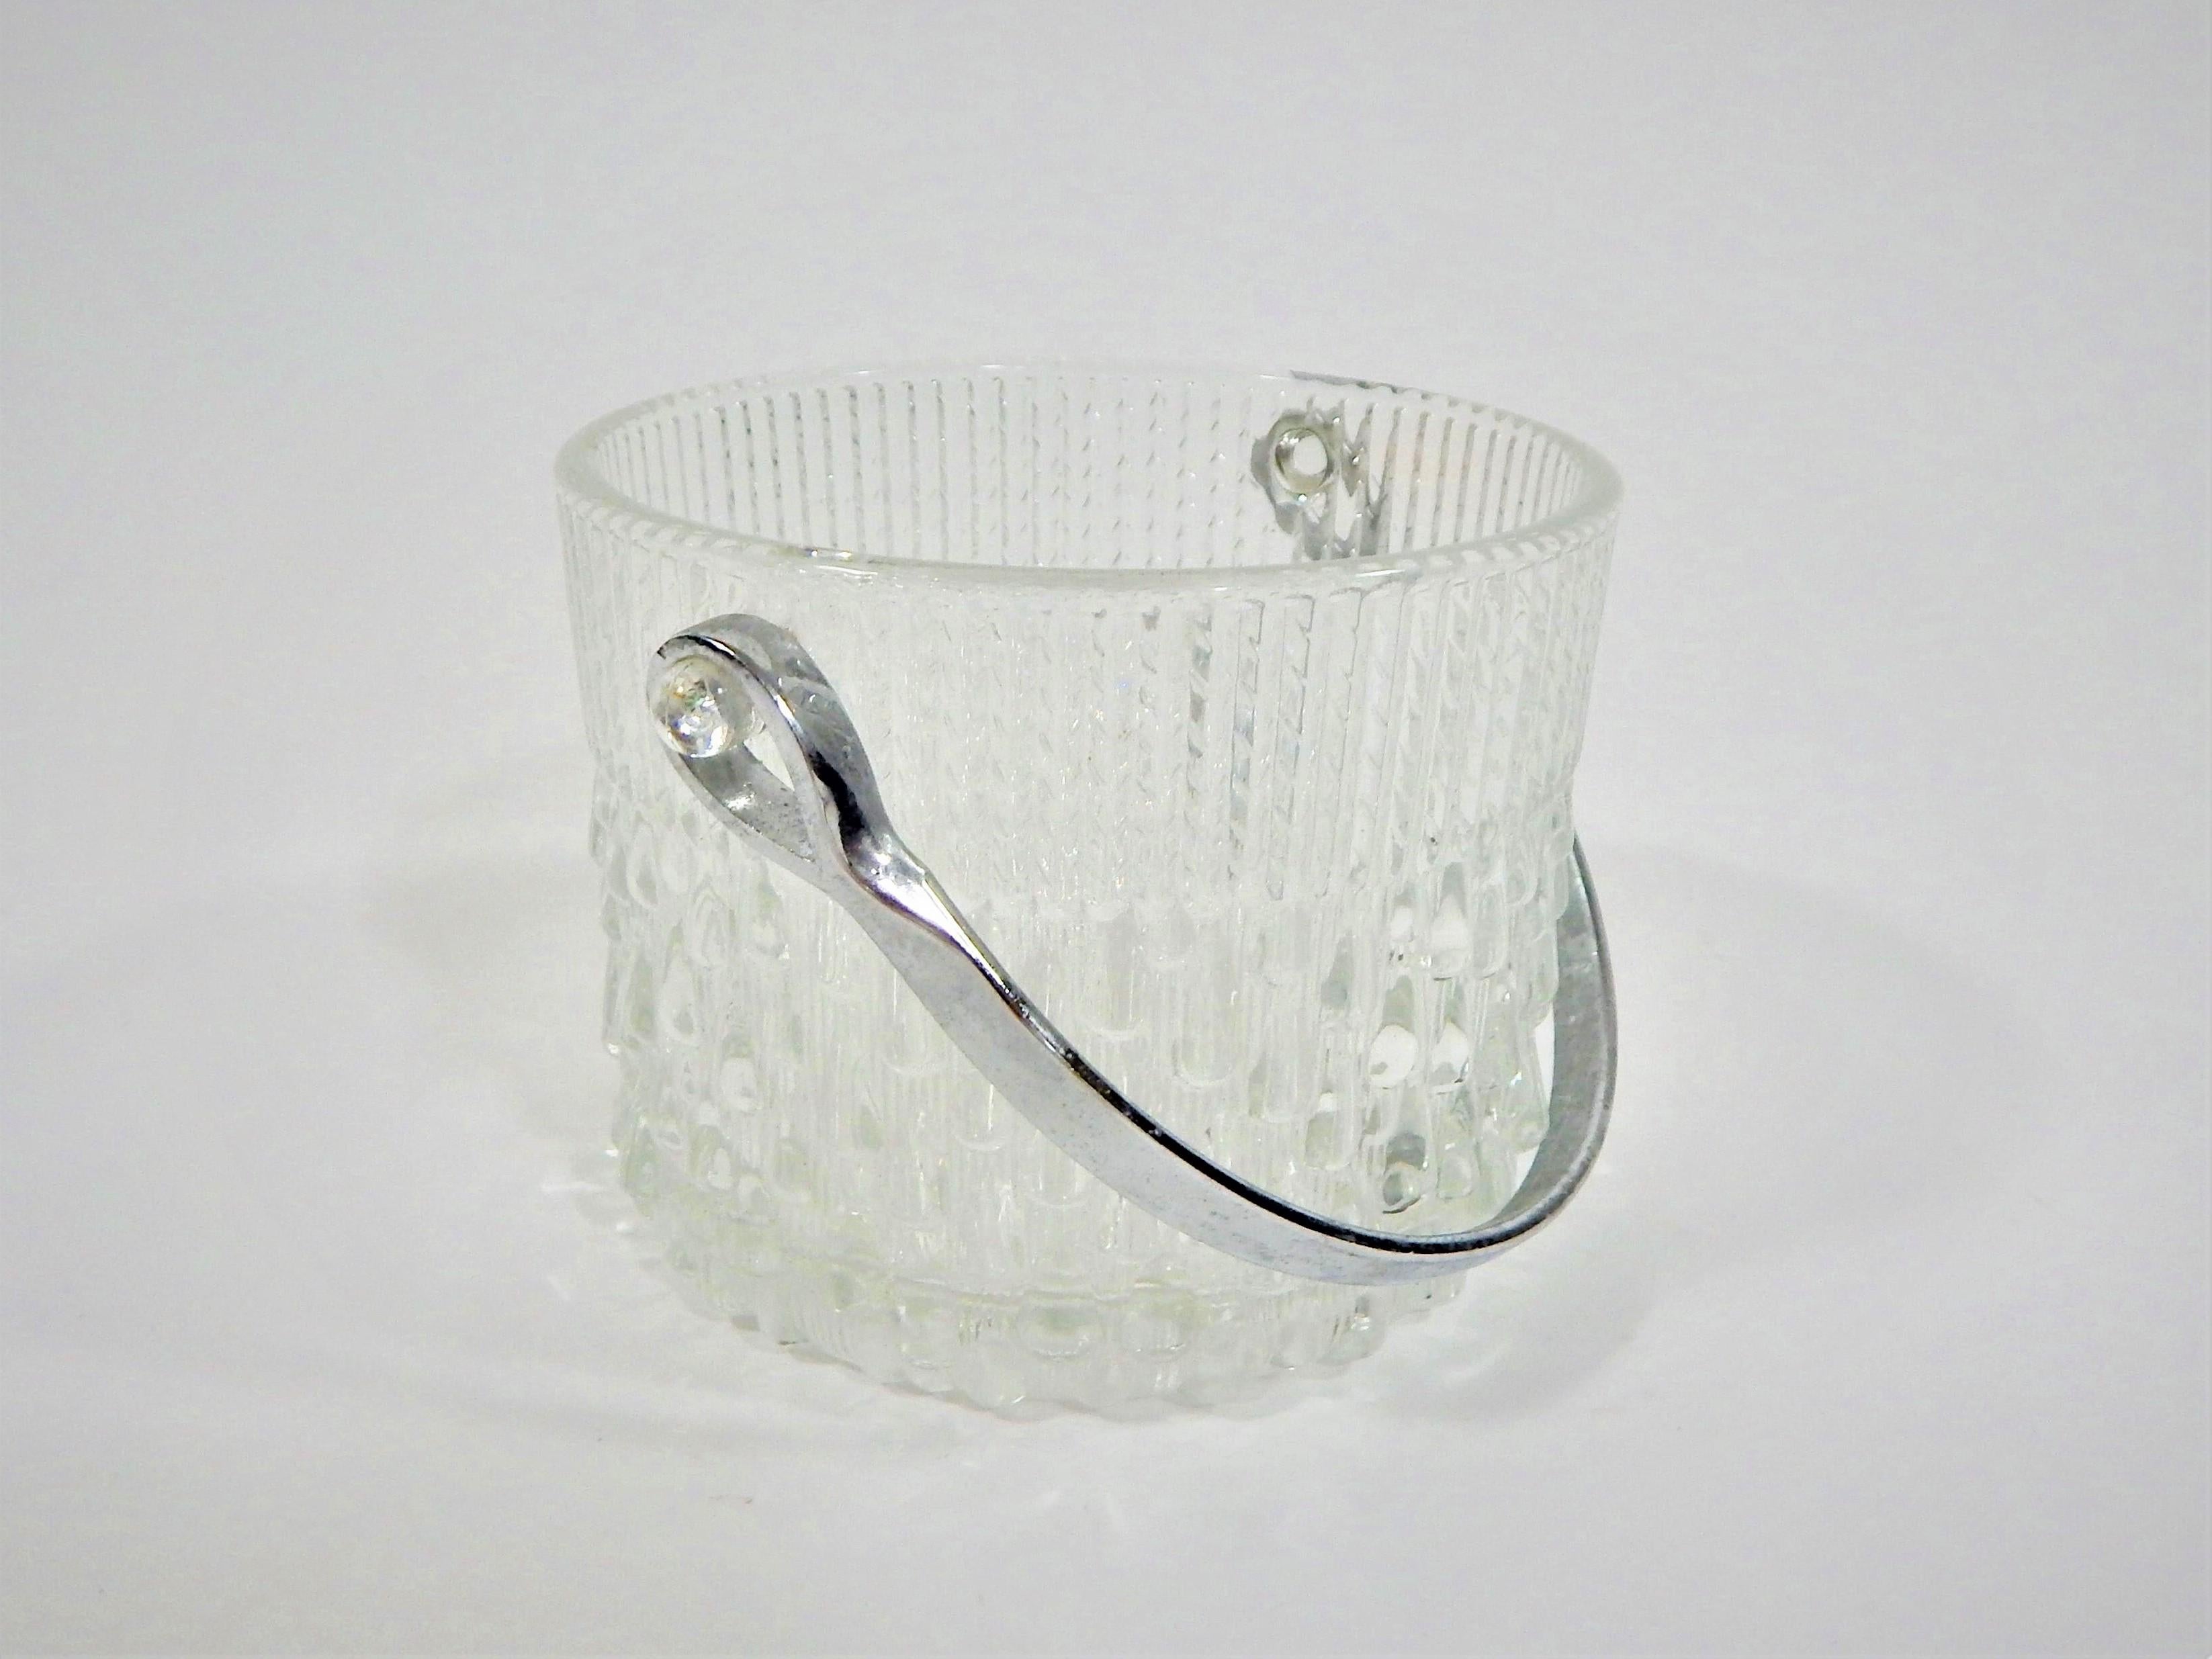 Small glass ice bucket for bar or barcart. Mid-Century Modern Design. Marked made in France. Chrome handle.